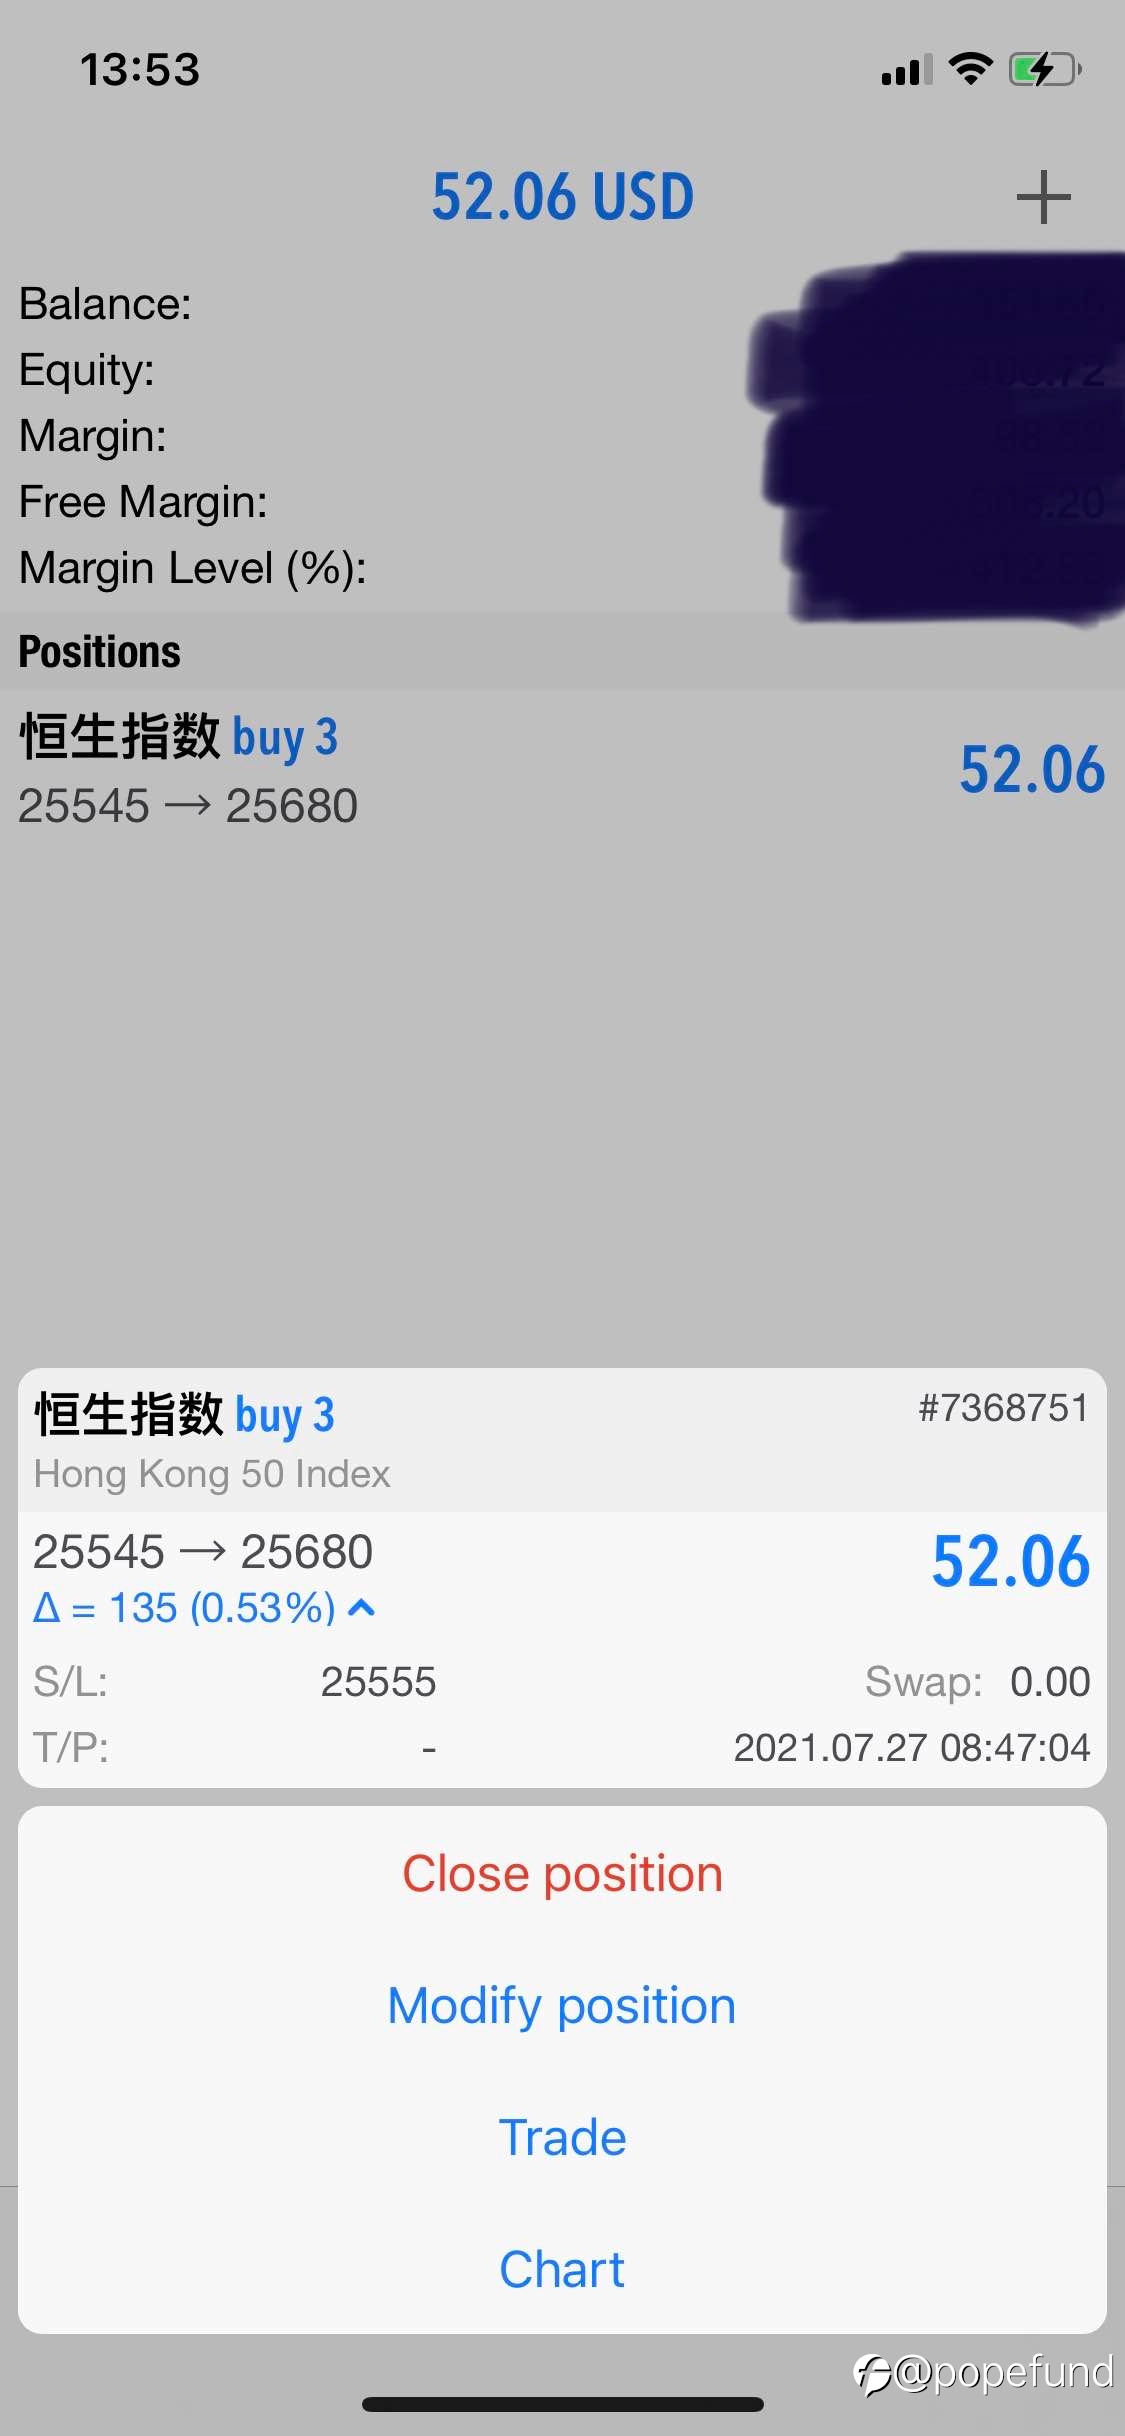 Long HSI @ 25545, 200 pips profits booked；shorts are big move indeed